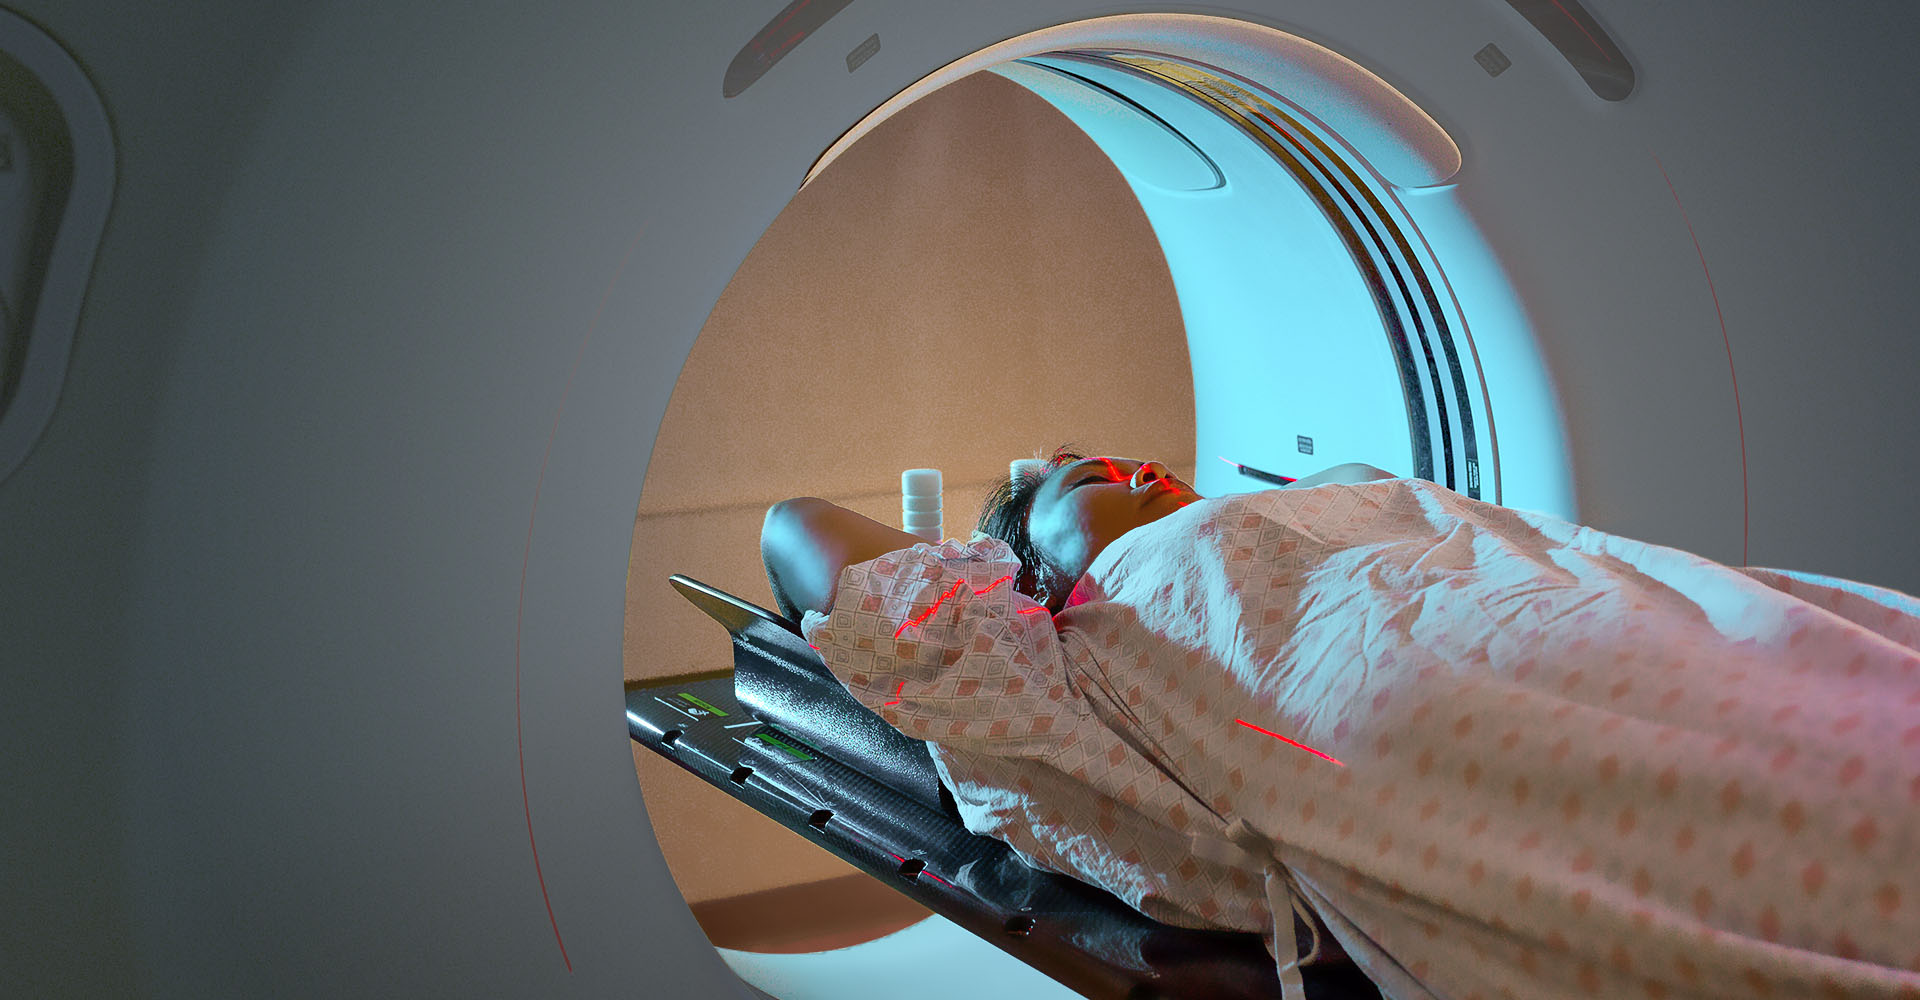 Women being treated with Radiotherapy